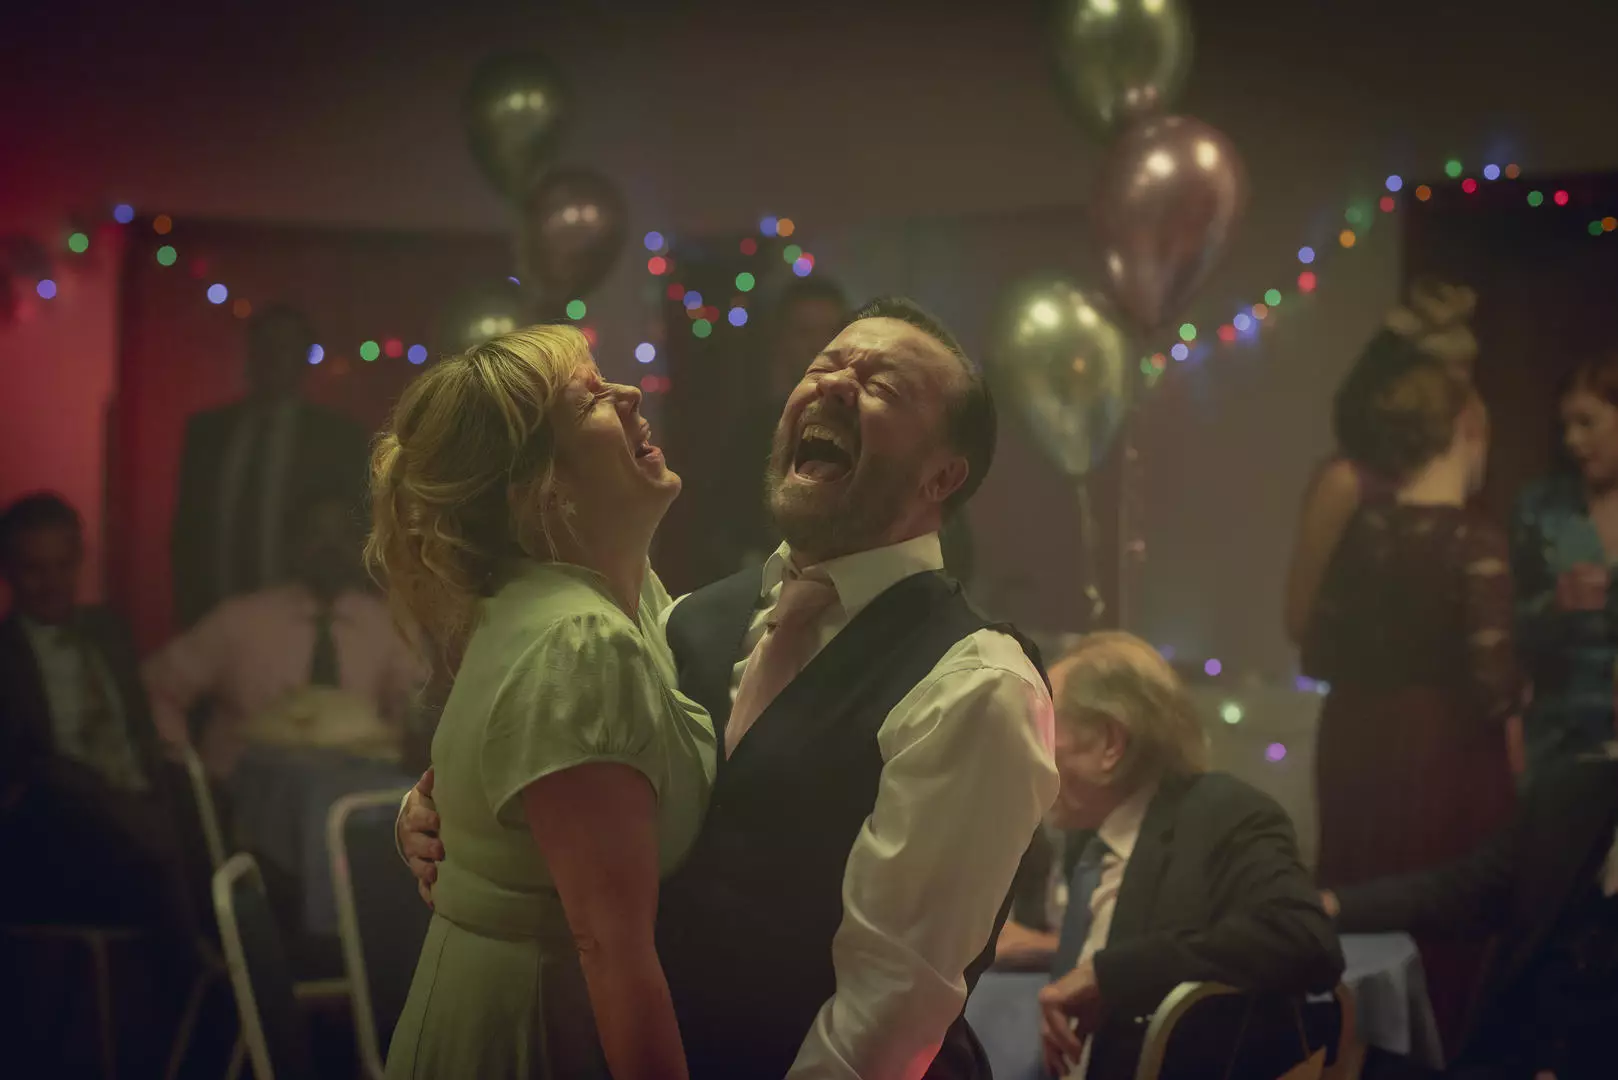 Ricky Gervais plays Tony, and Kerry Godliman plays his late wife Lisa (